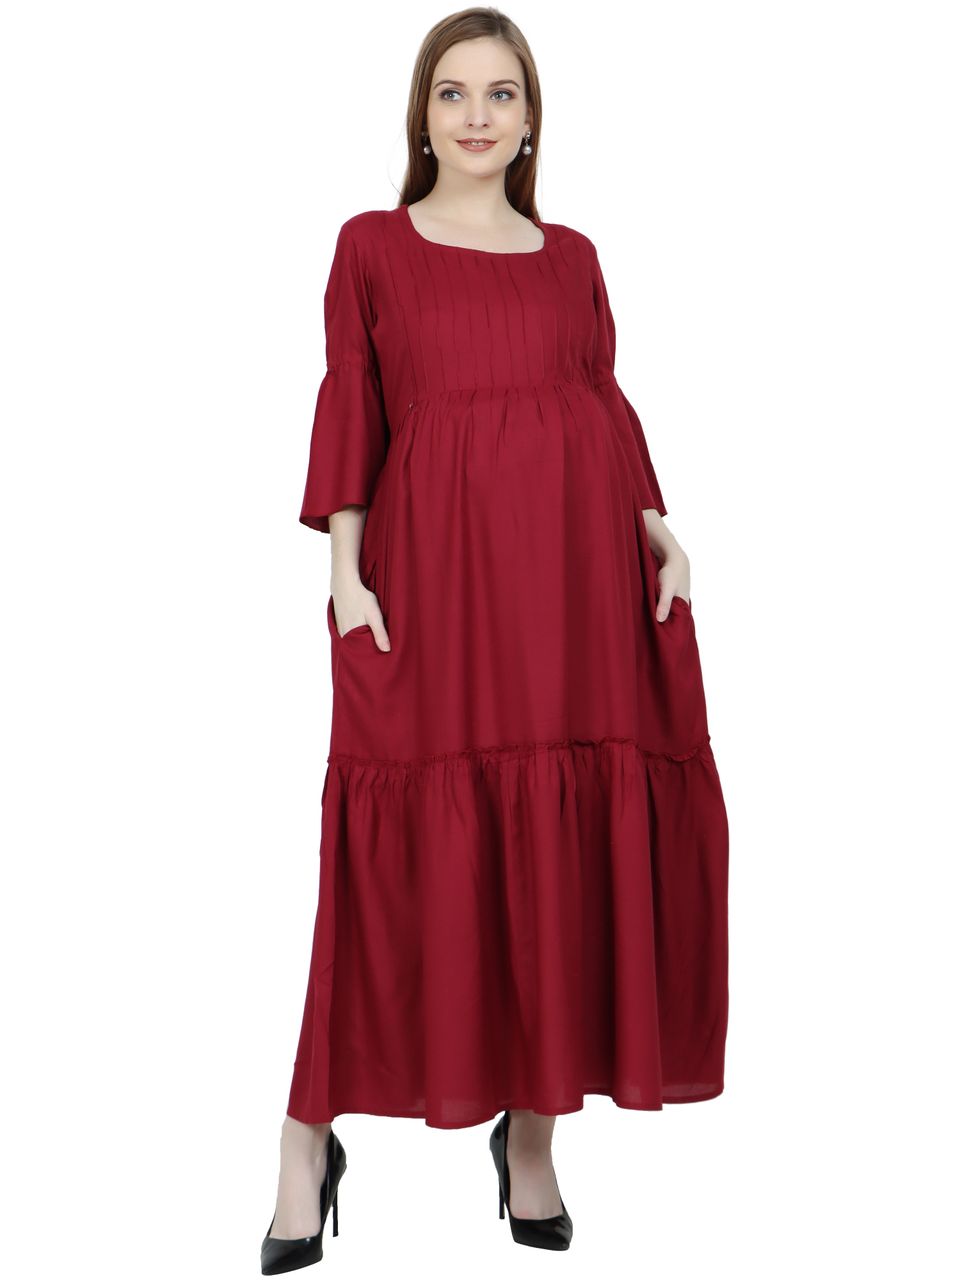 Maternity and Feeding Kurti/Dress | Rayon Maroon Color | With Cotton Lining